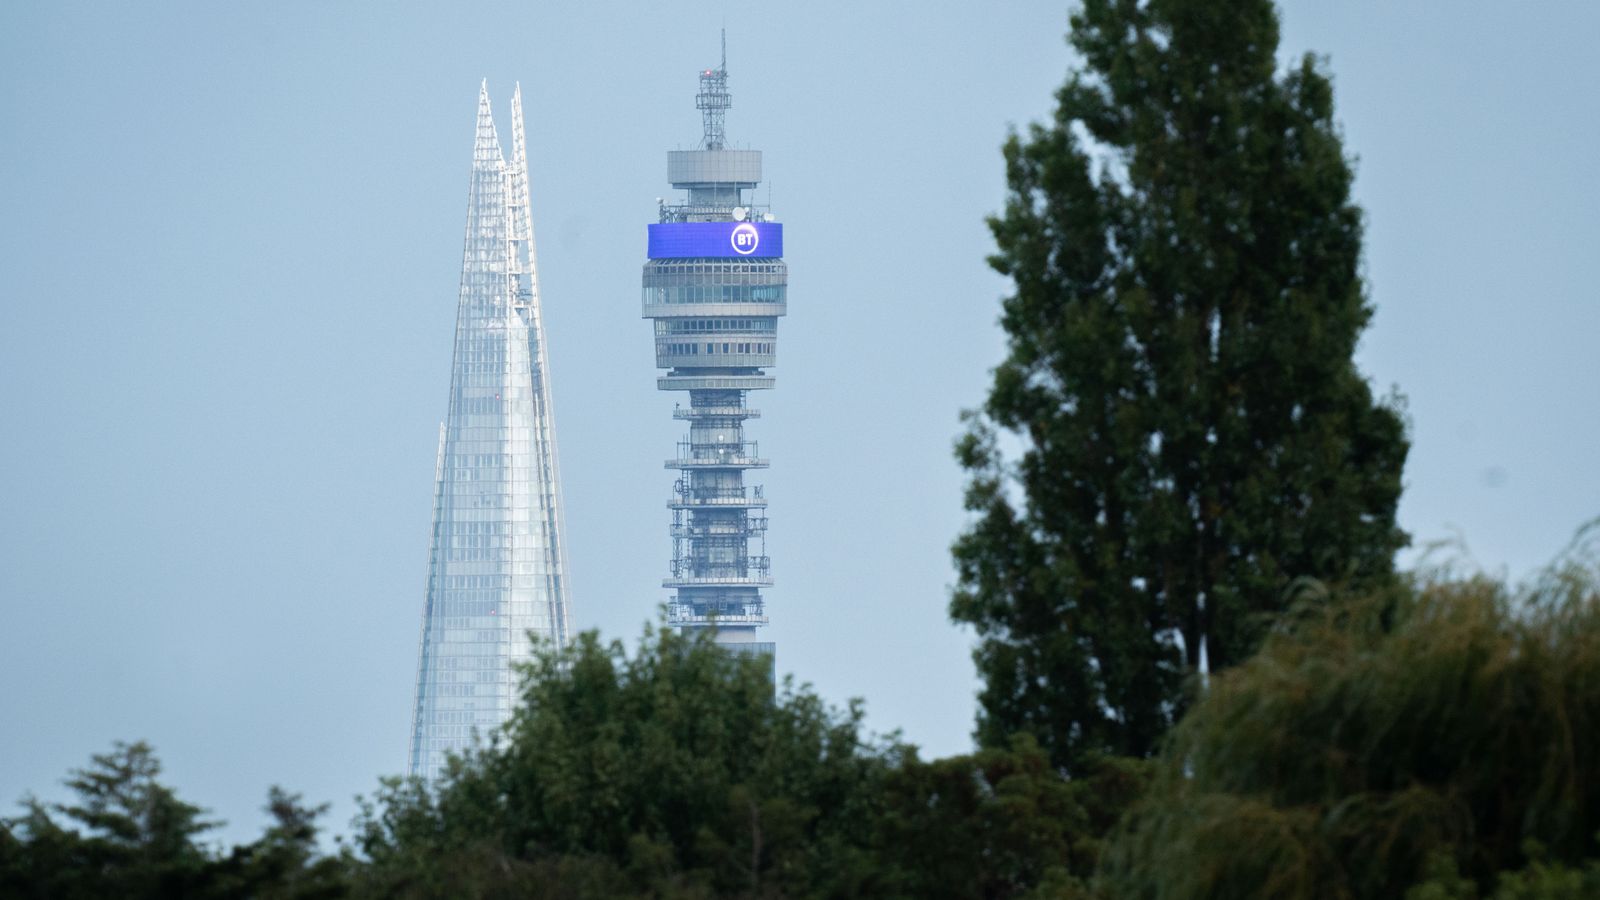 bt tower - once london's tallest building - sold